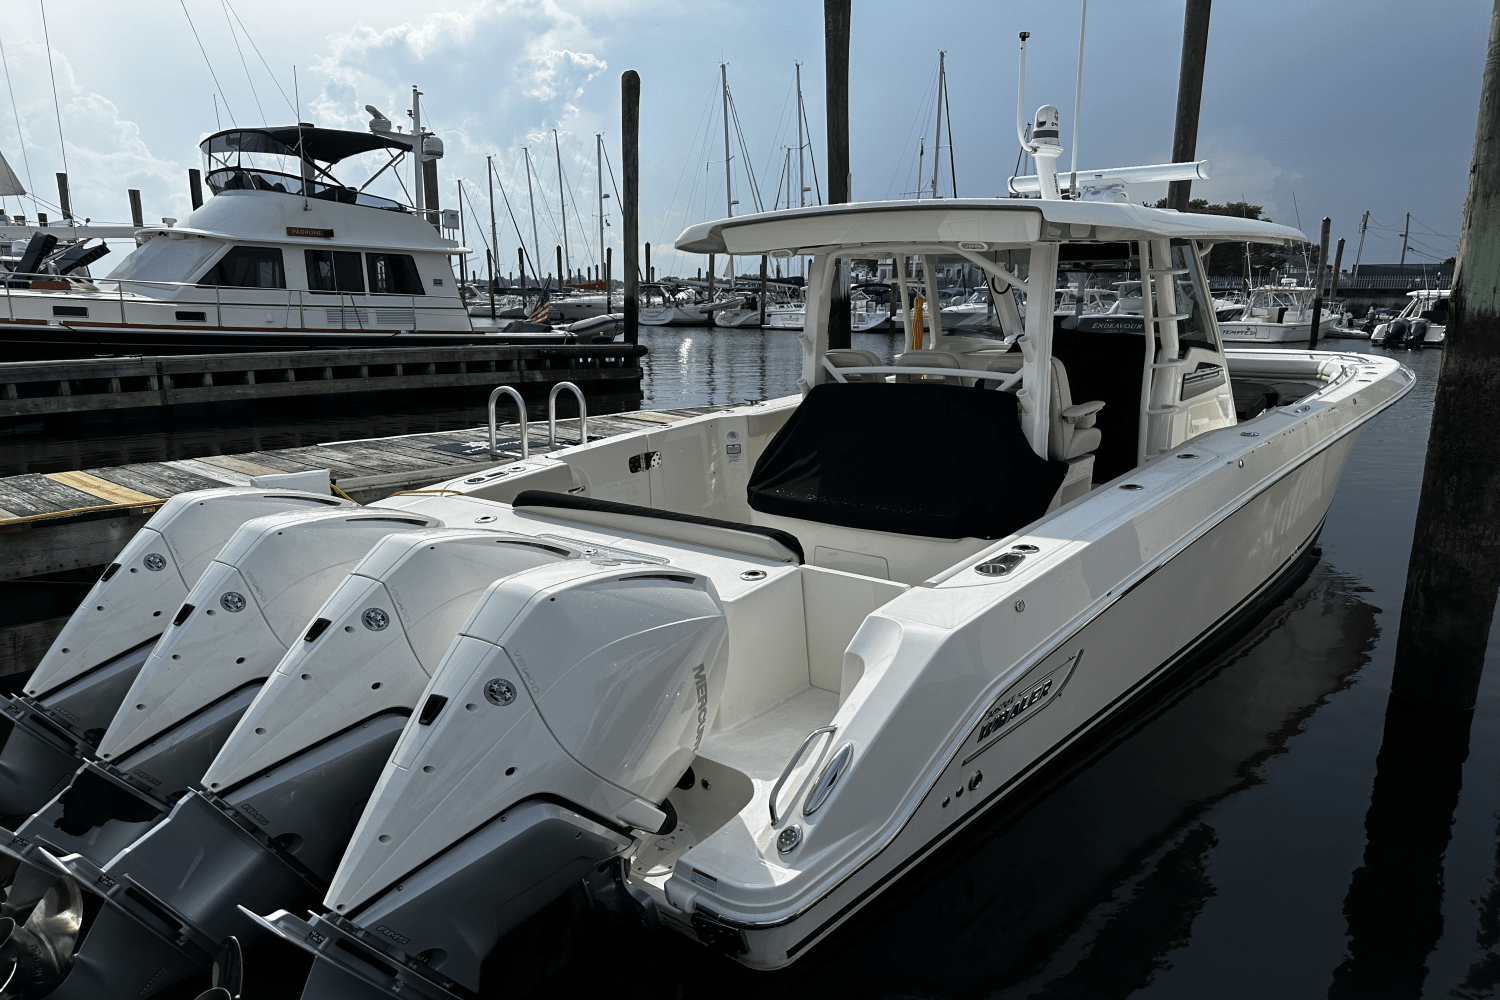 Used freshwater fishing boats for sale in Connecticut - boats.com